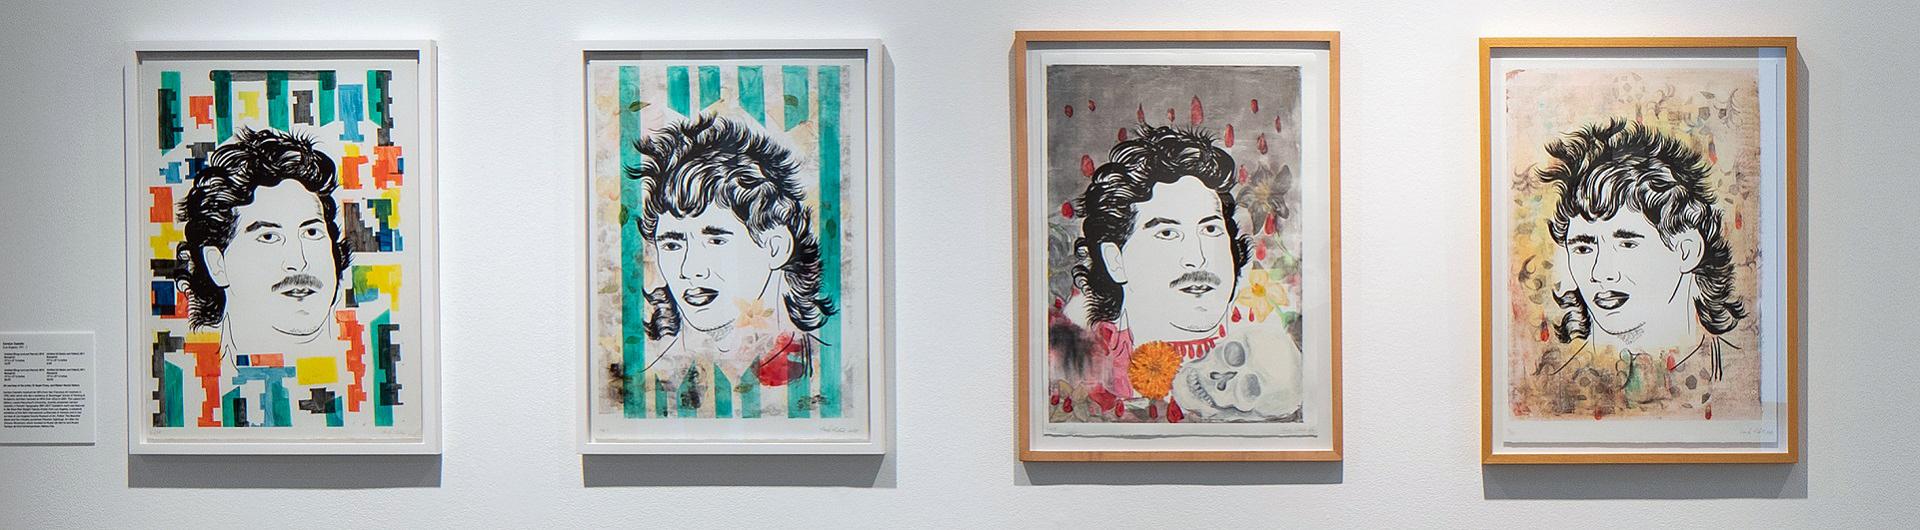 Carolyn Castaño, (left to right) Untitled (Drug Lord and Patron), 2010, ed 14/37; Untitled (of Nation and Fútbol), 2011,